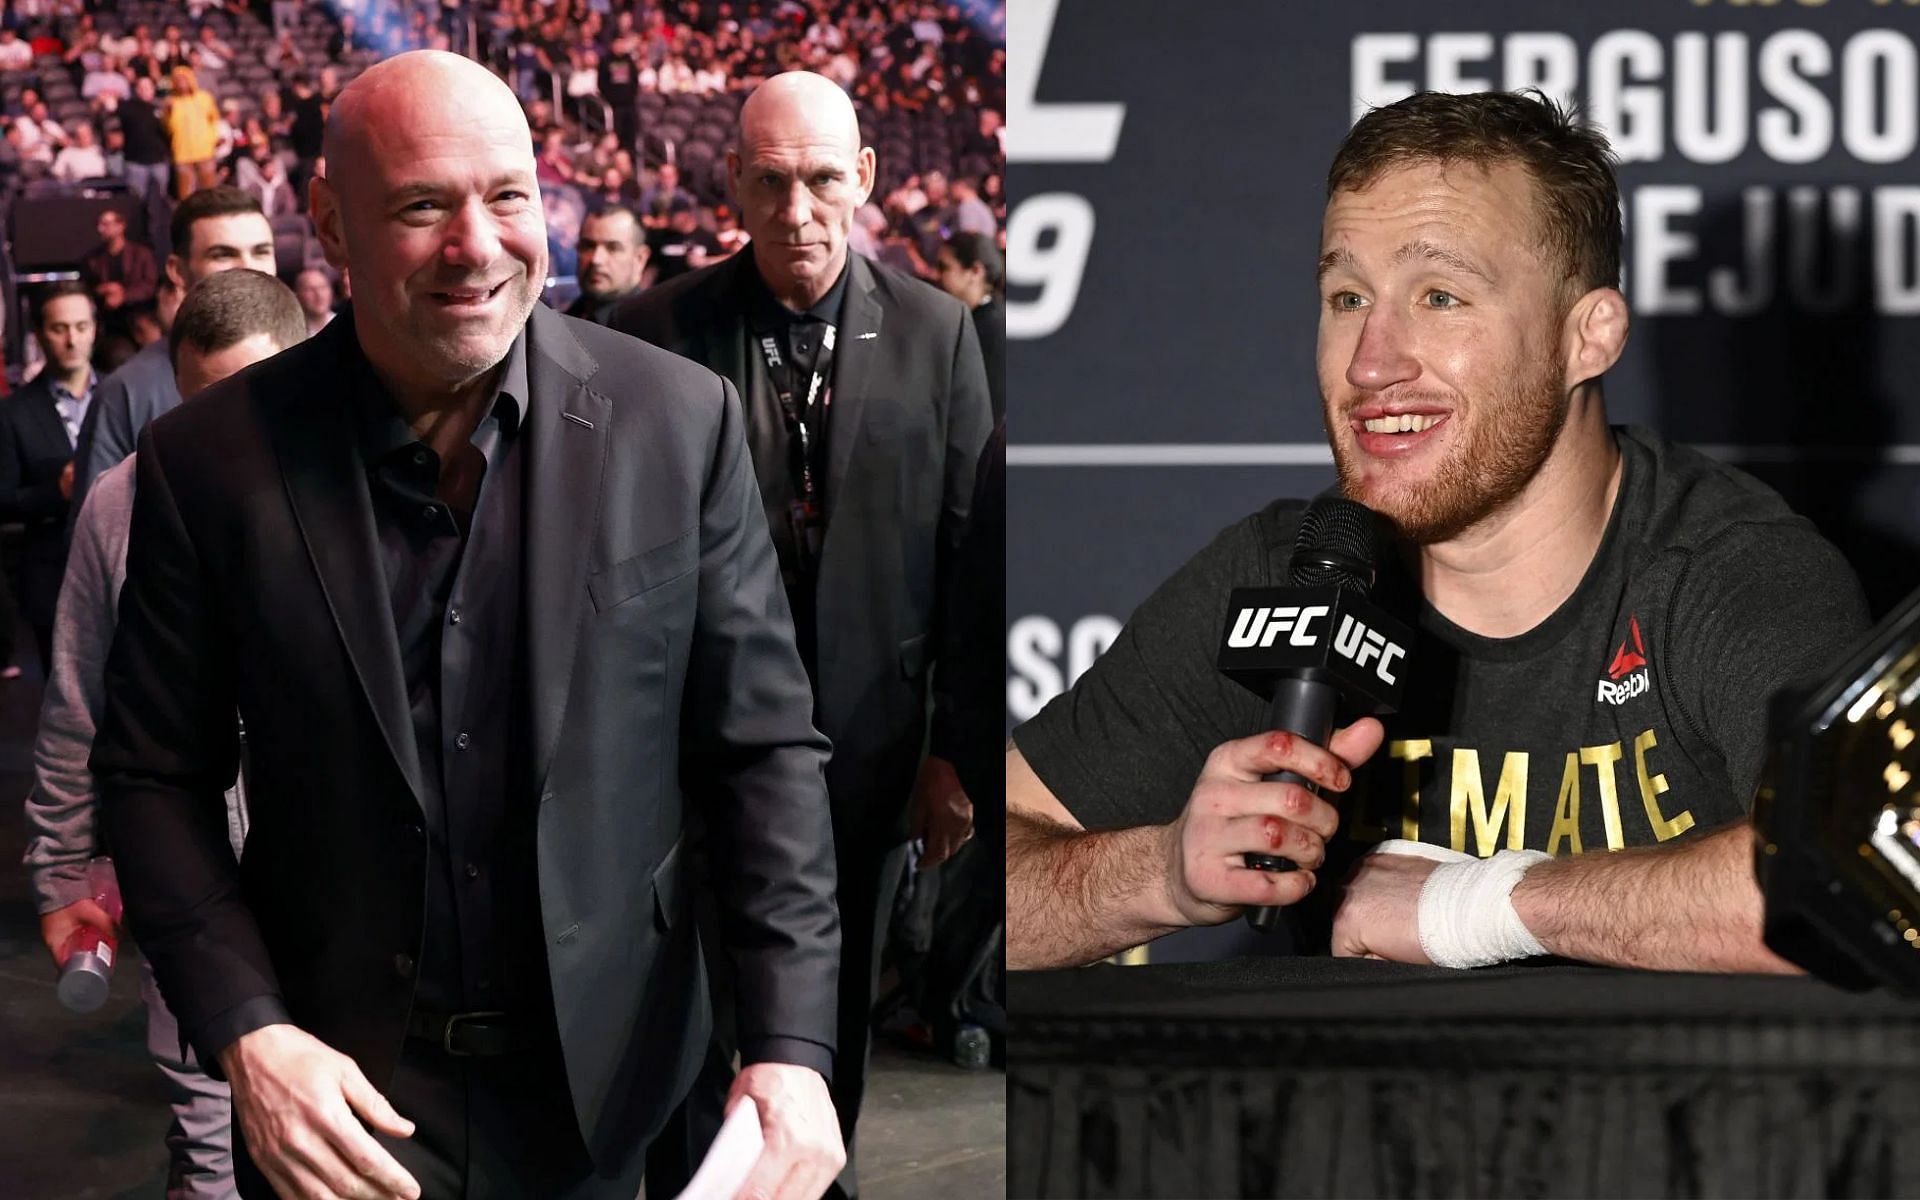 Justin Gaethje (right) thought Dana White (left) would grant him a title shot after KO win over Dustin Poirier [Images Courtesy: @GettyImages]